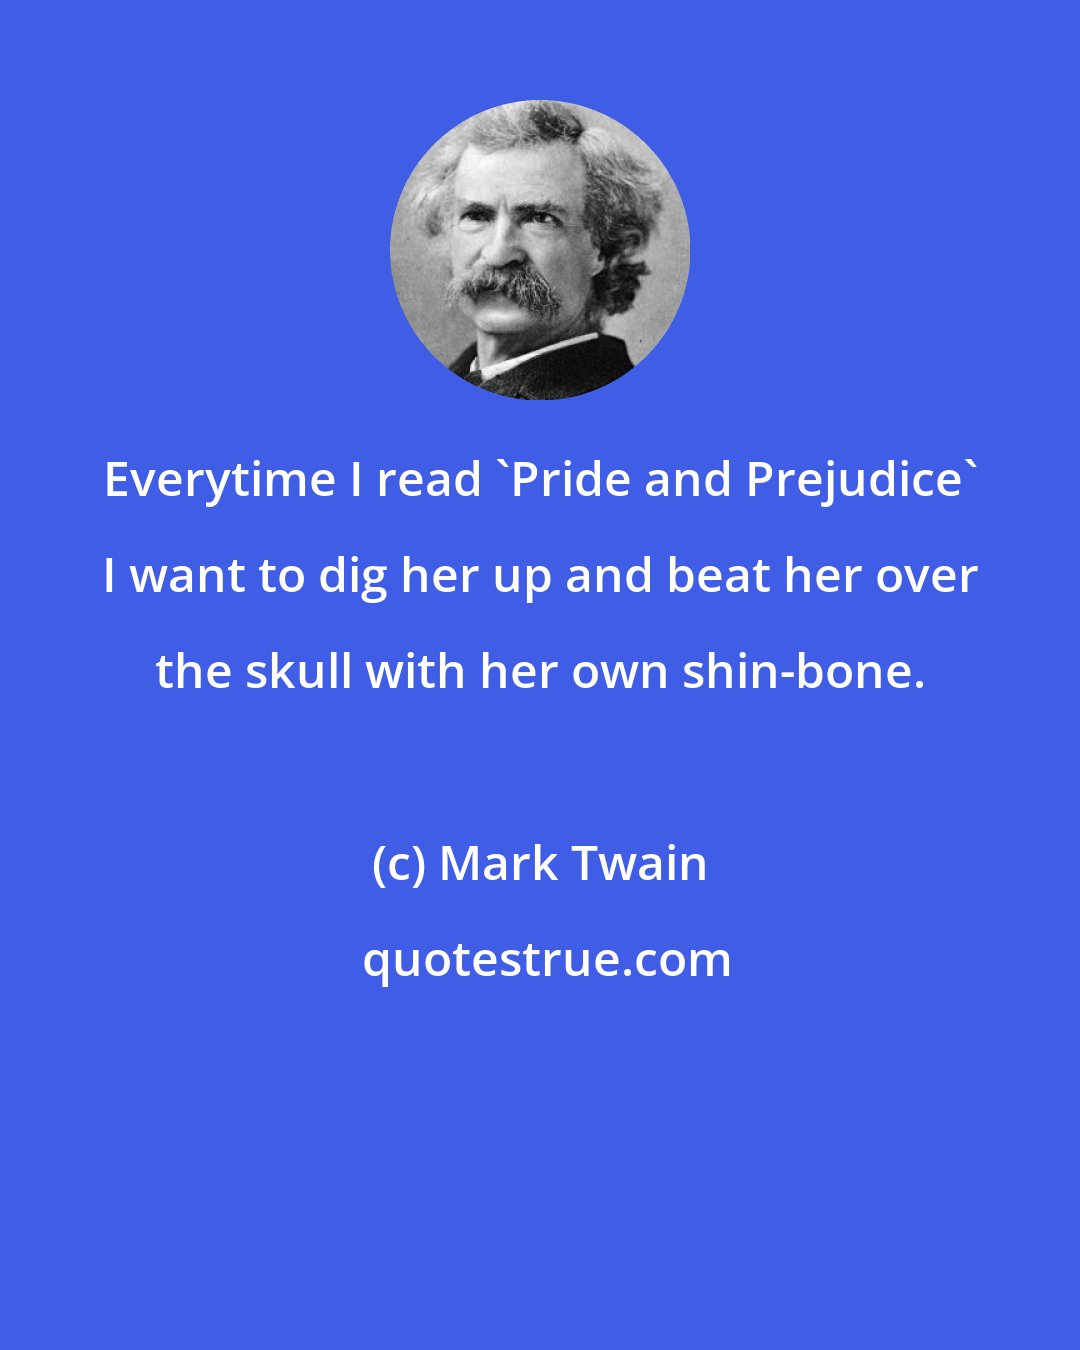 Mark Twain: Everytime I read 'Pride and Prejudice' I want to dig her up and beat her over the skull with her own shin-bone.